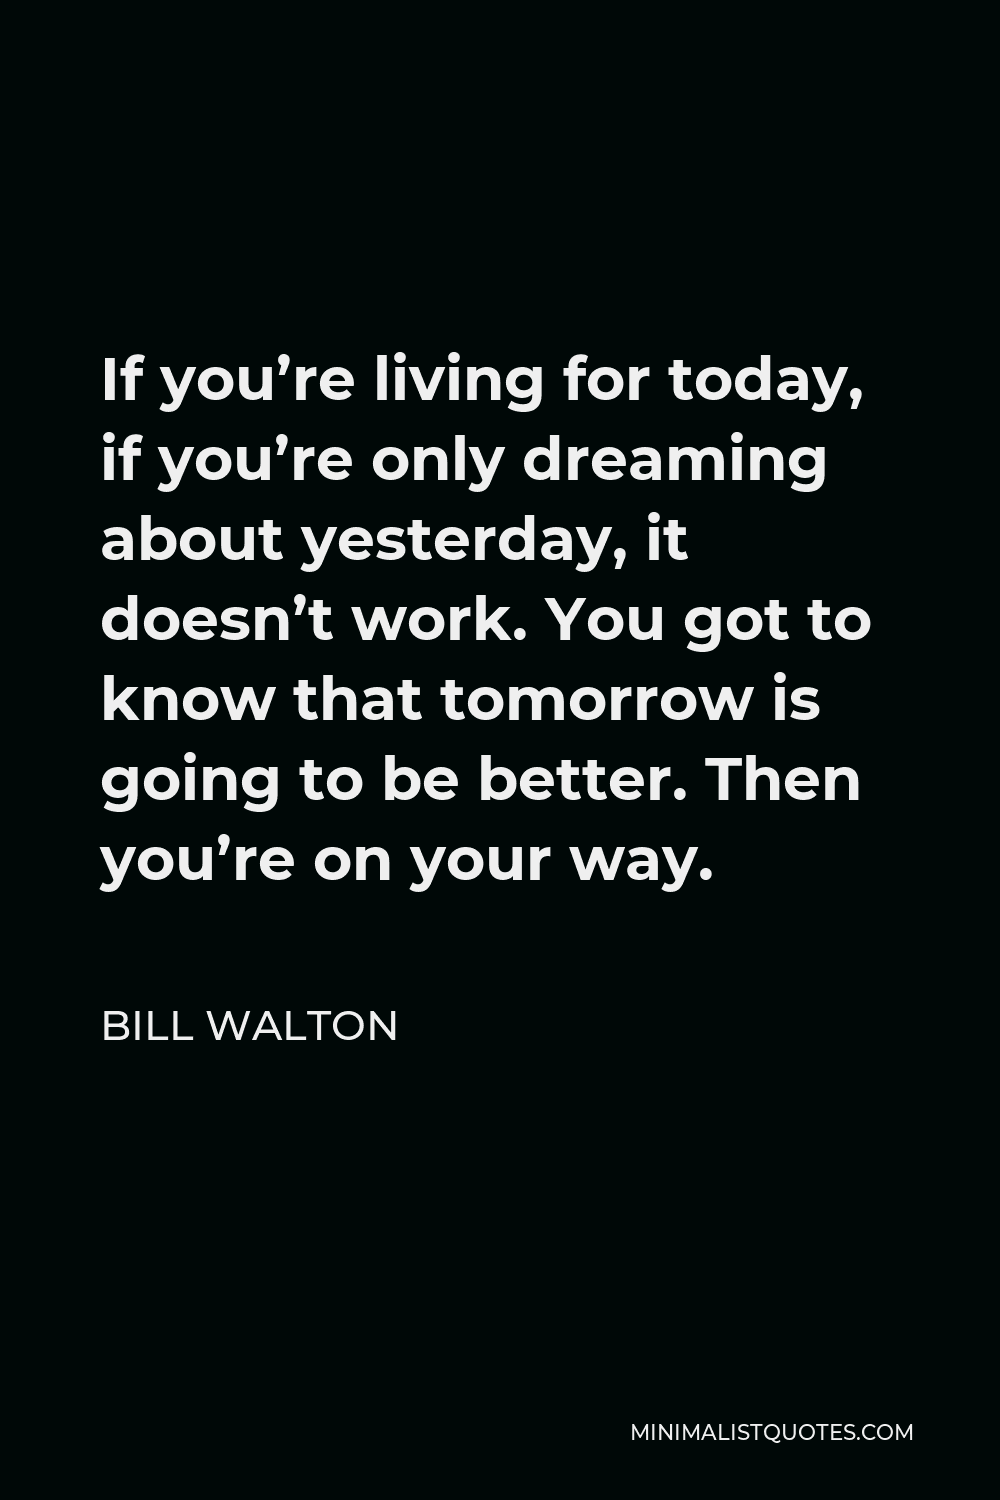 Bill Walton Quote - If you’re living for today, if you’re only dreaming about yesterday, it doesn’t work. You got to know that tomorrow is going to be better. Then you’re on your way.